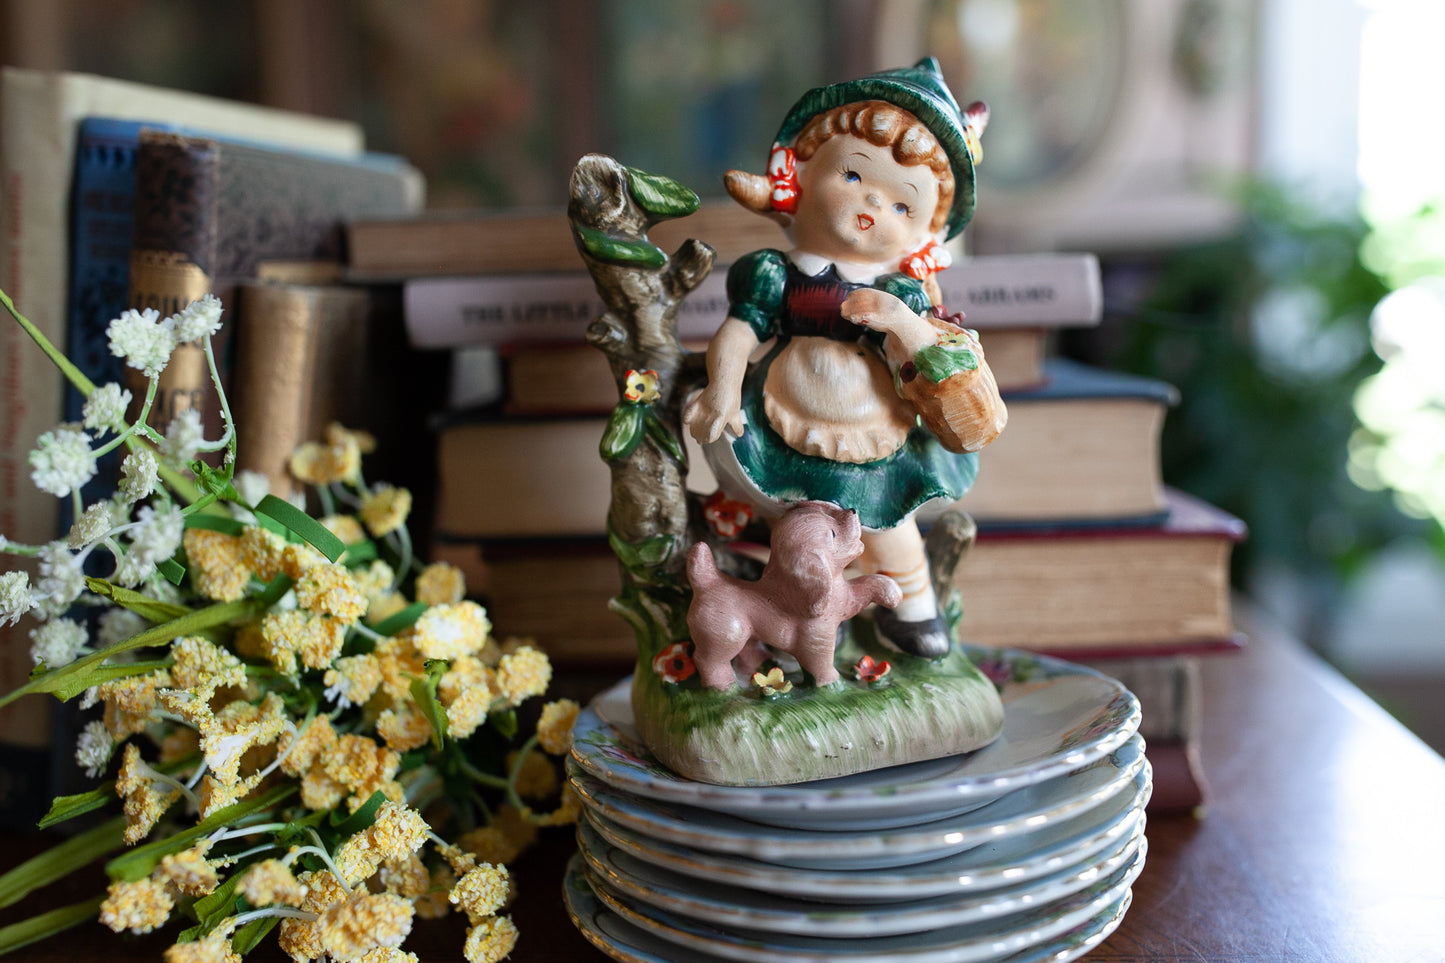 Vintage Porcelain Figurine - Girl with flowers and puppy